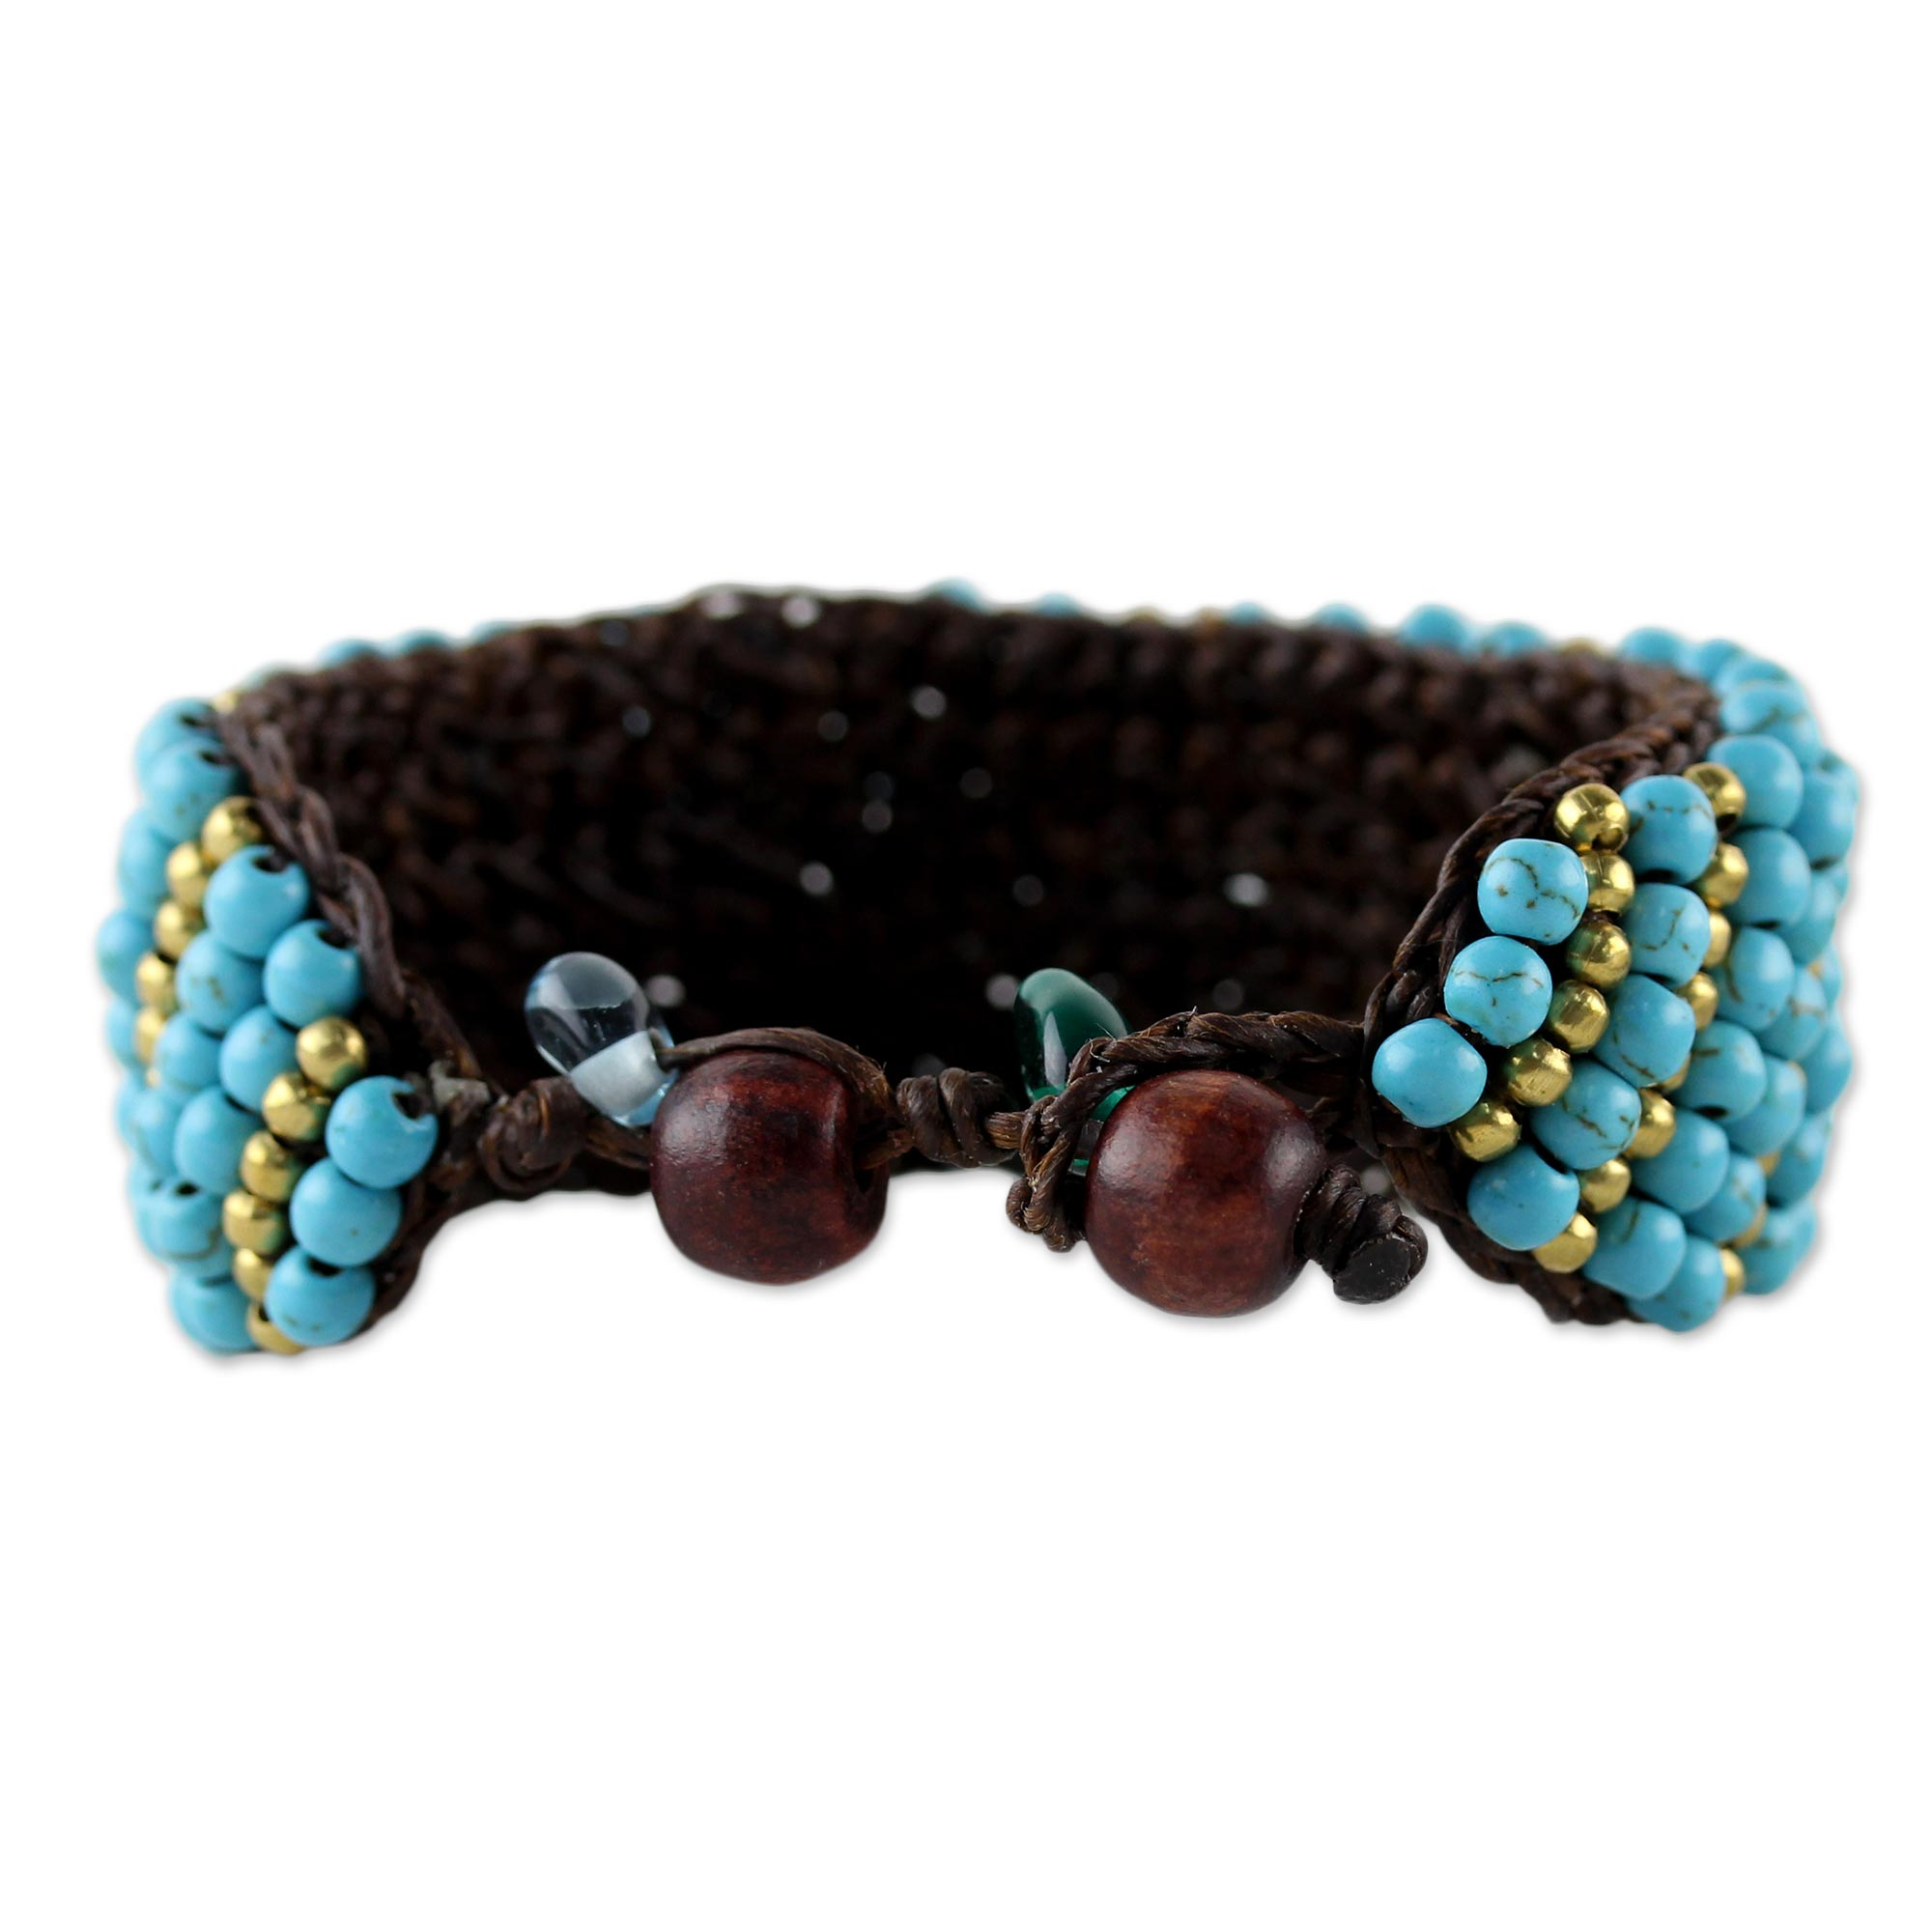 Calcite and Brass Beaded Wristband Bracelet from Thailand - Thai Smile ...